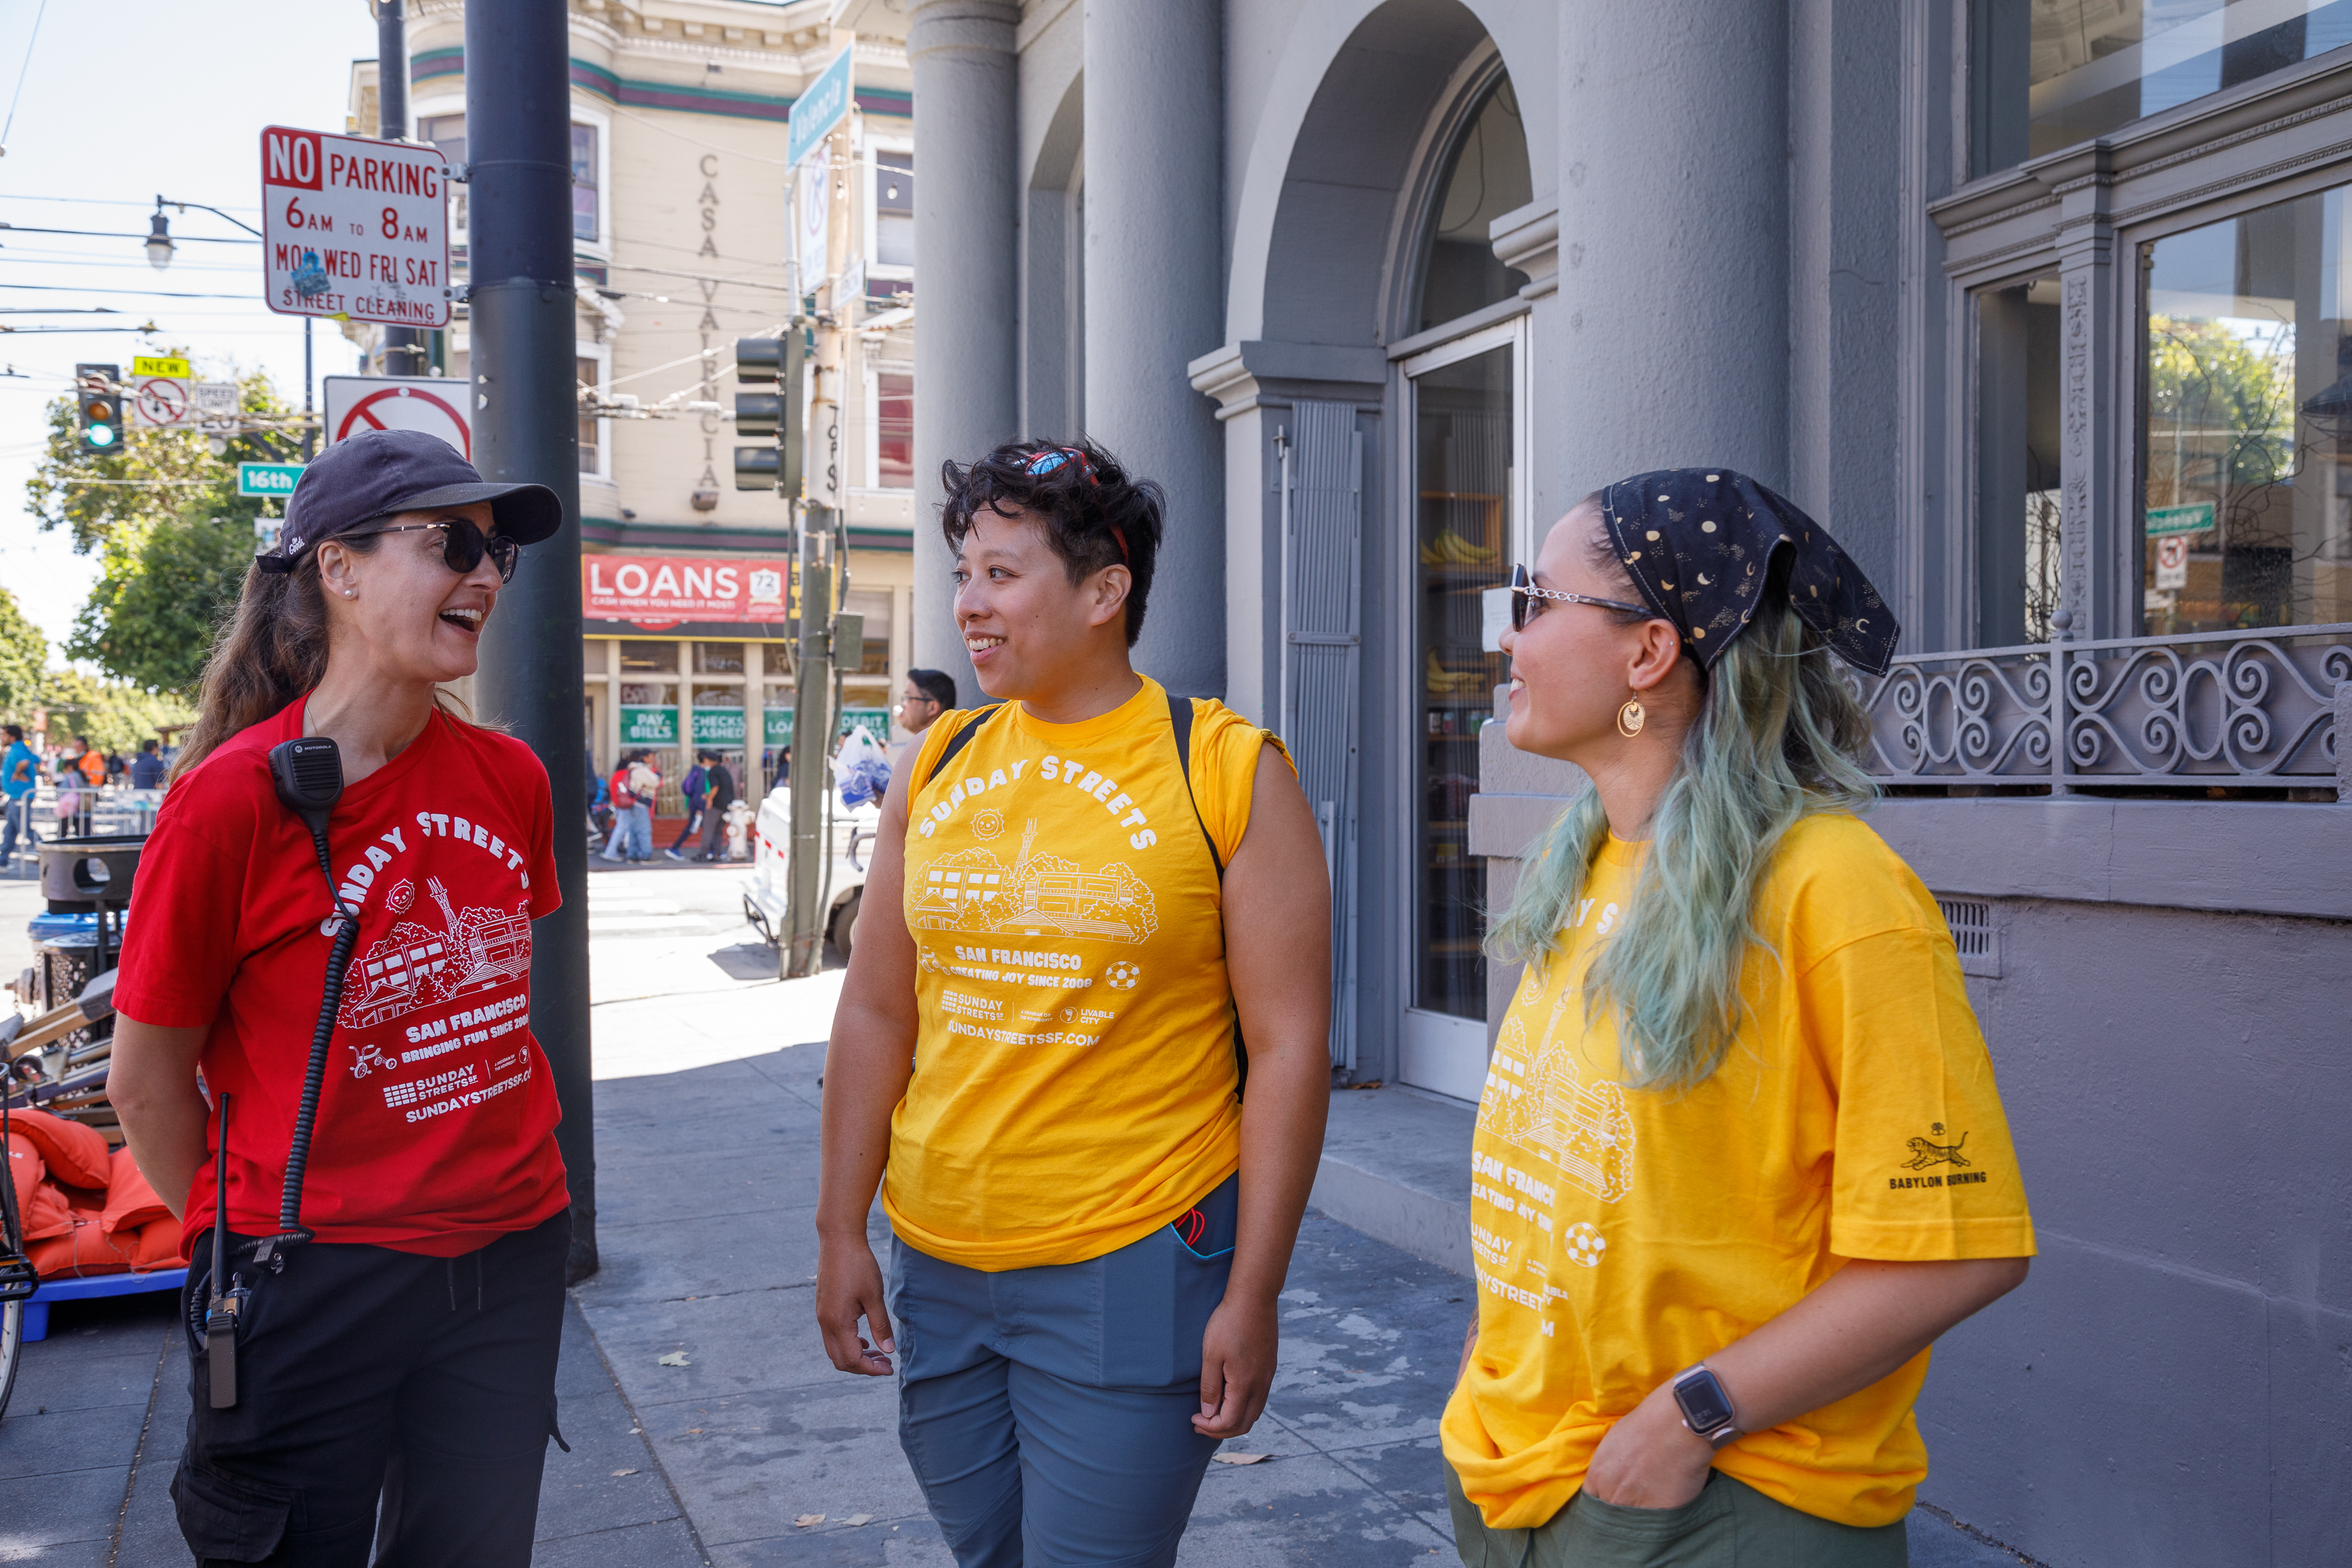 Three people in colorful t-shirts stand chatting on the sidewalk near a street corner.